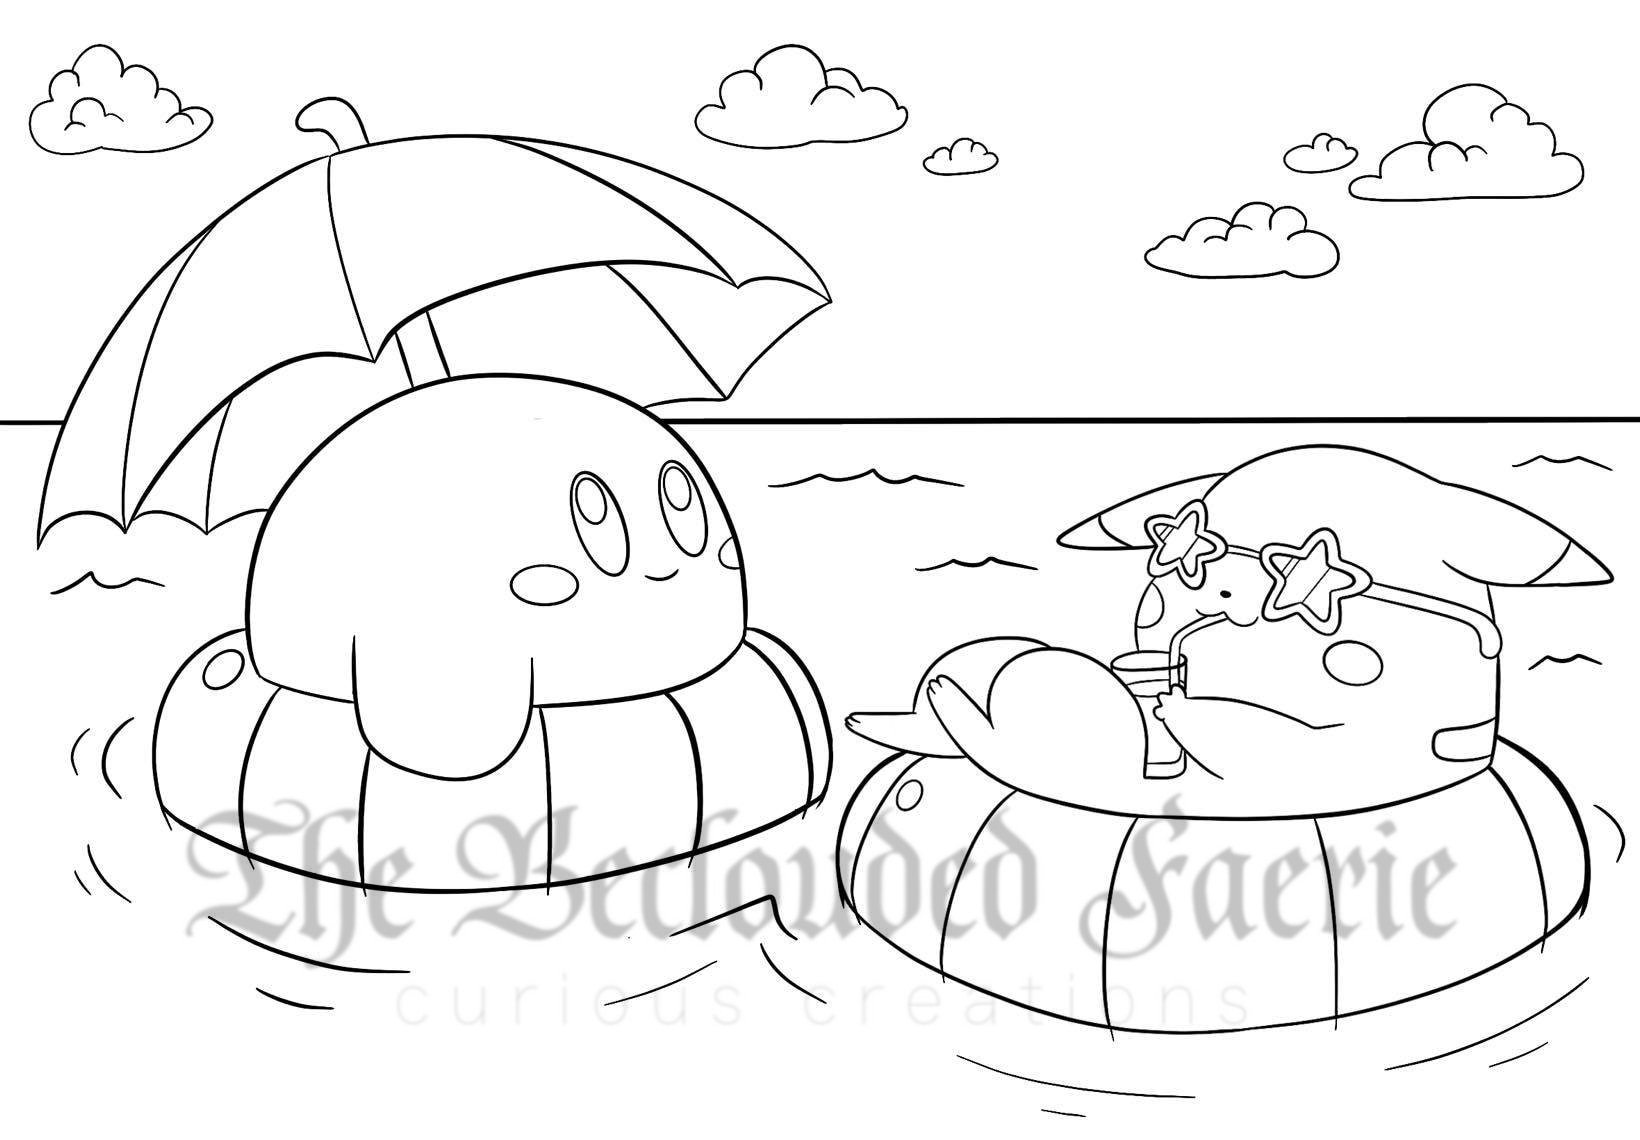 Kirby and pikachu summer ocean coloring page